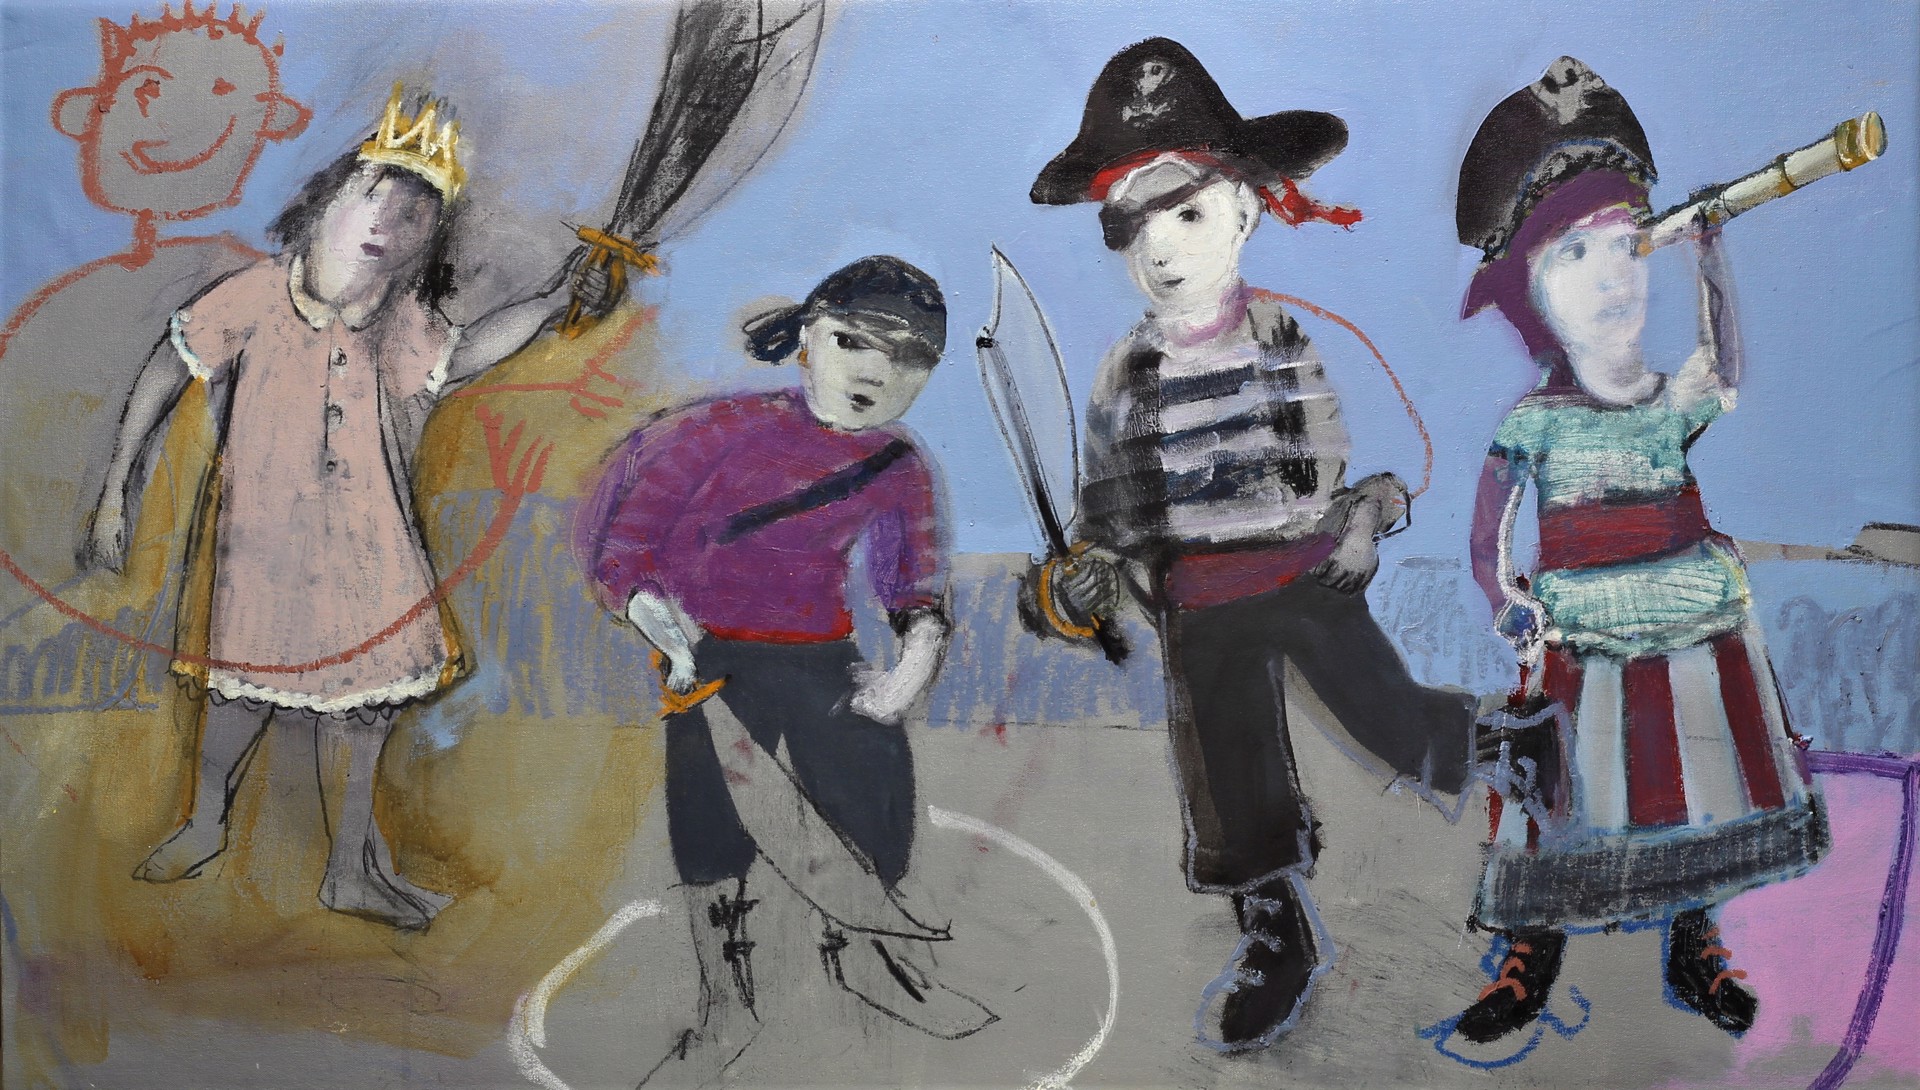 IN MY NEXT LIFE I WANT TO BE A PIRATE by CHRISTINA THWAITES (Figures)